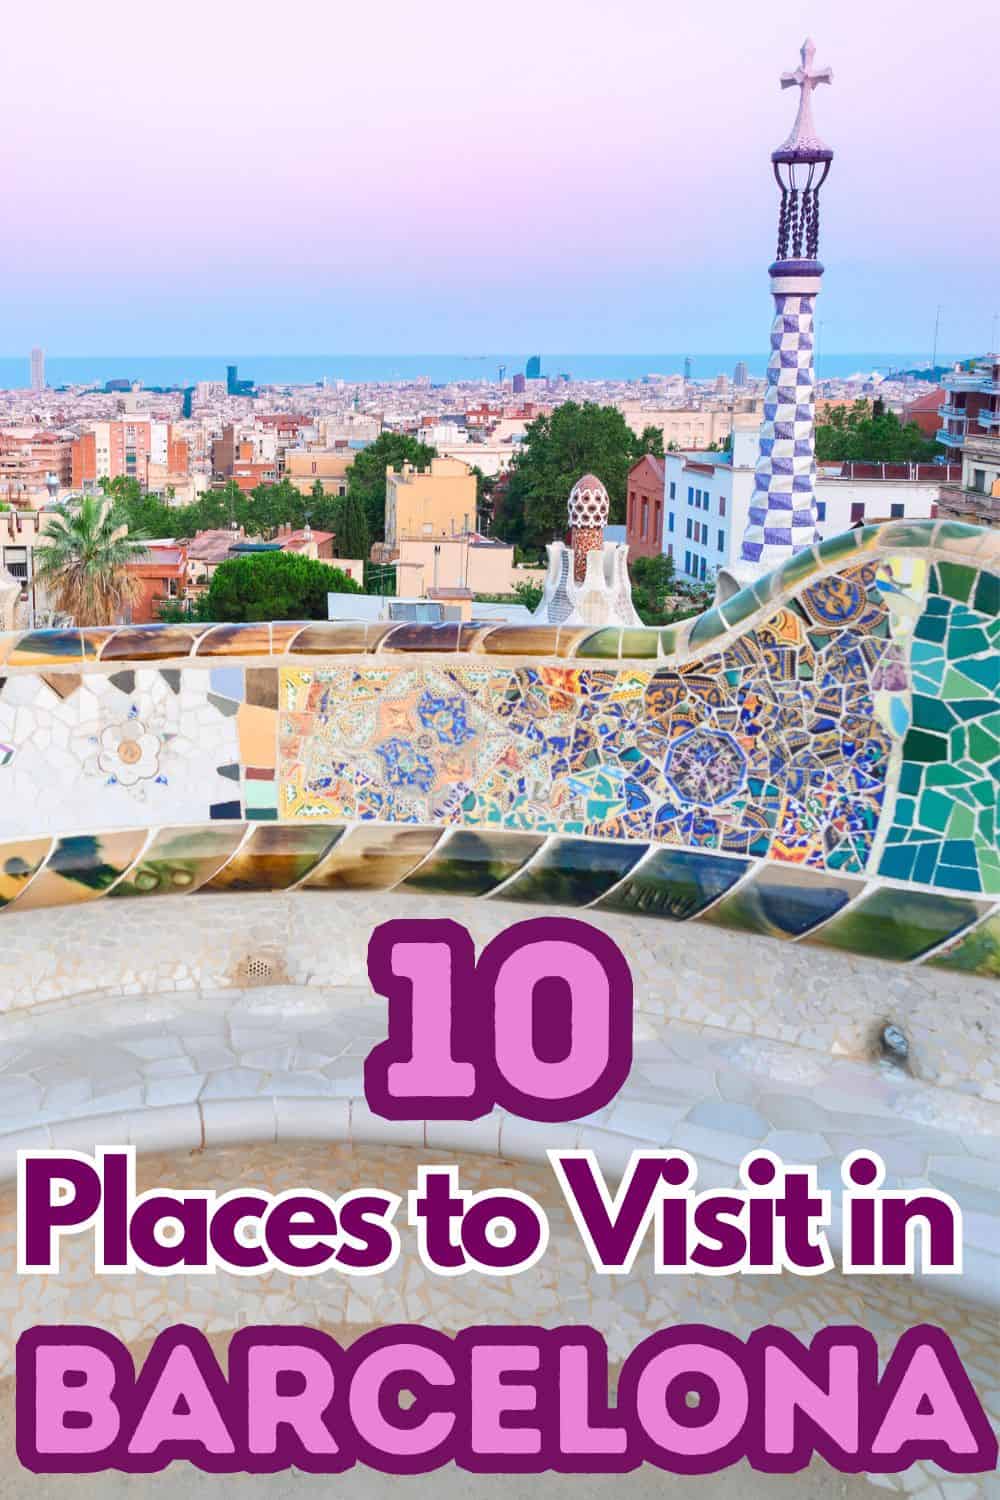 10 Places to Visit in Barcelona